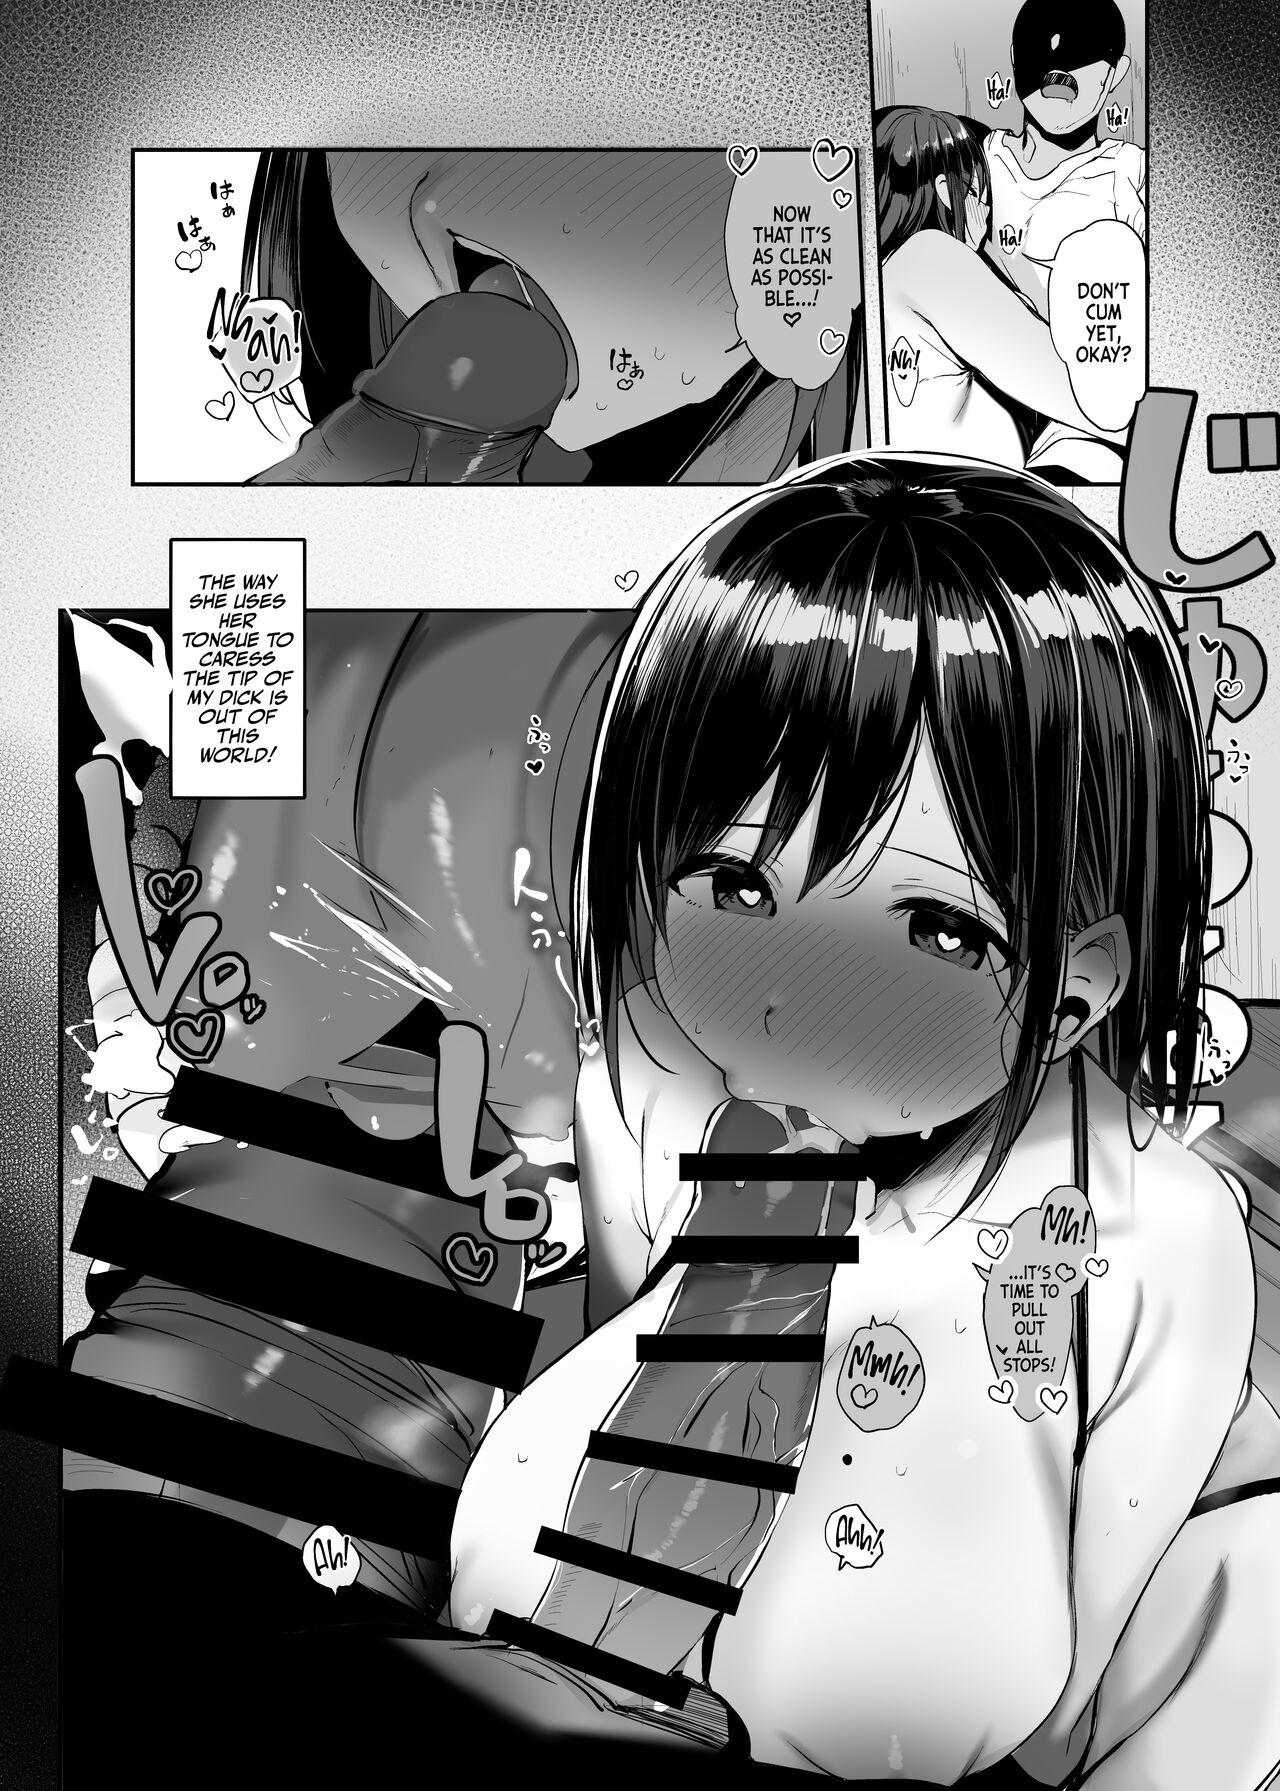 Blow Jobs Kyou, Tomete Kuremasen ka? | Can I Stay Over, Mister? - Original Squirt - Page 11